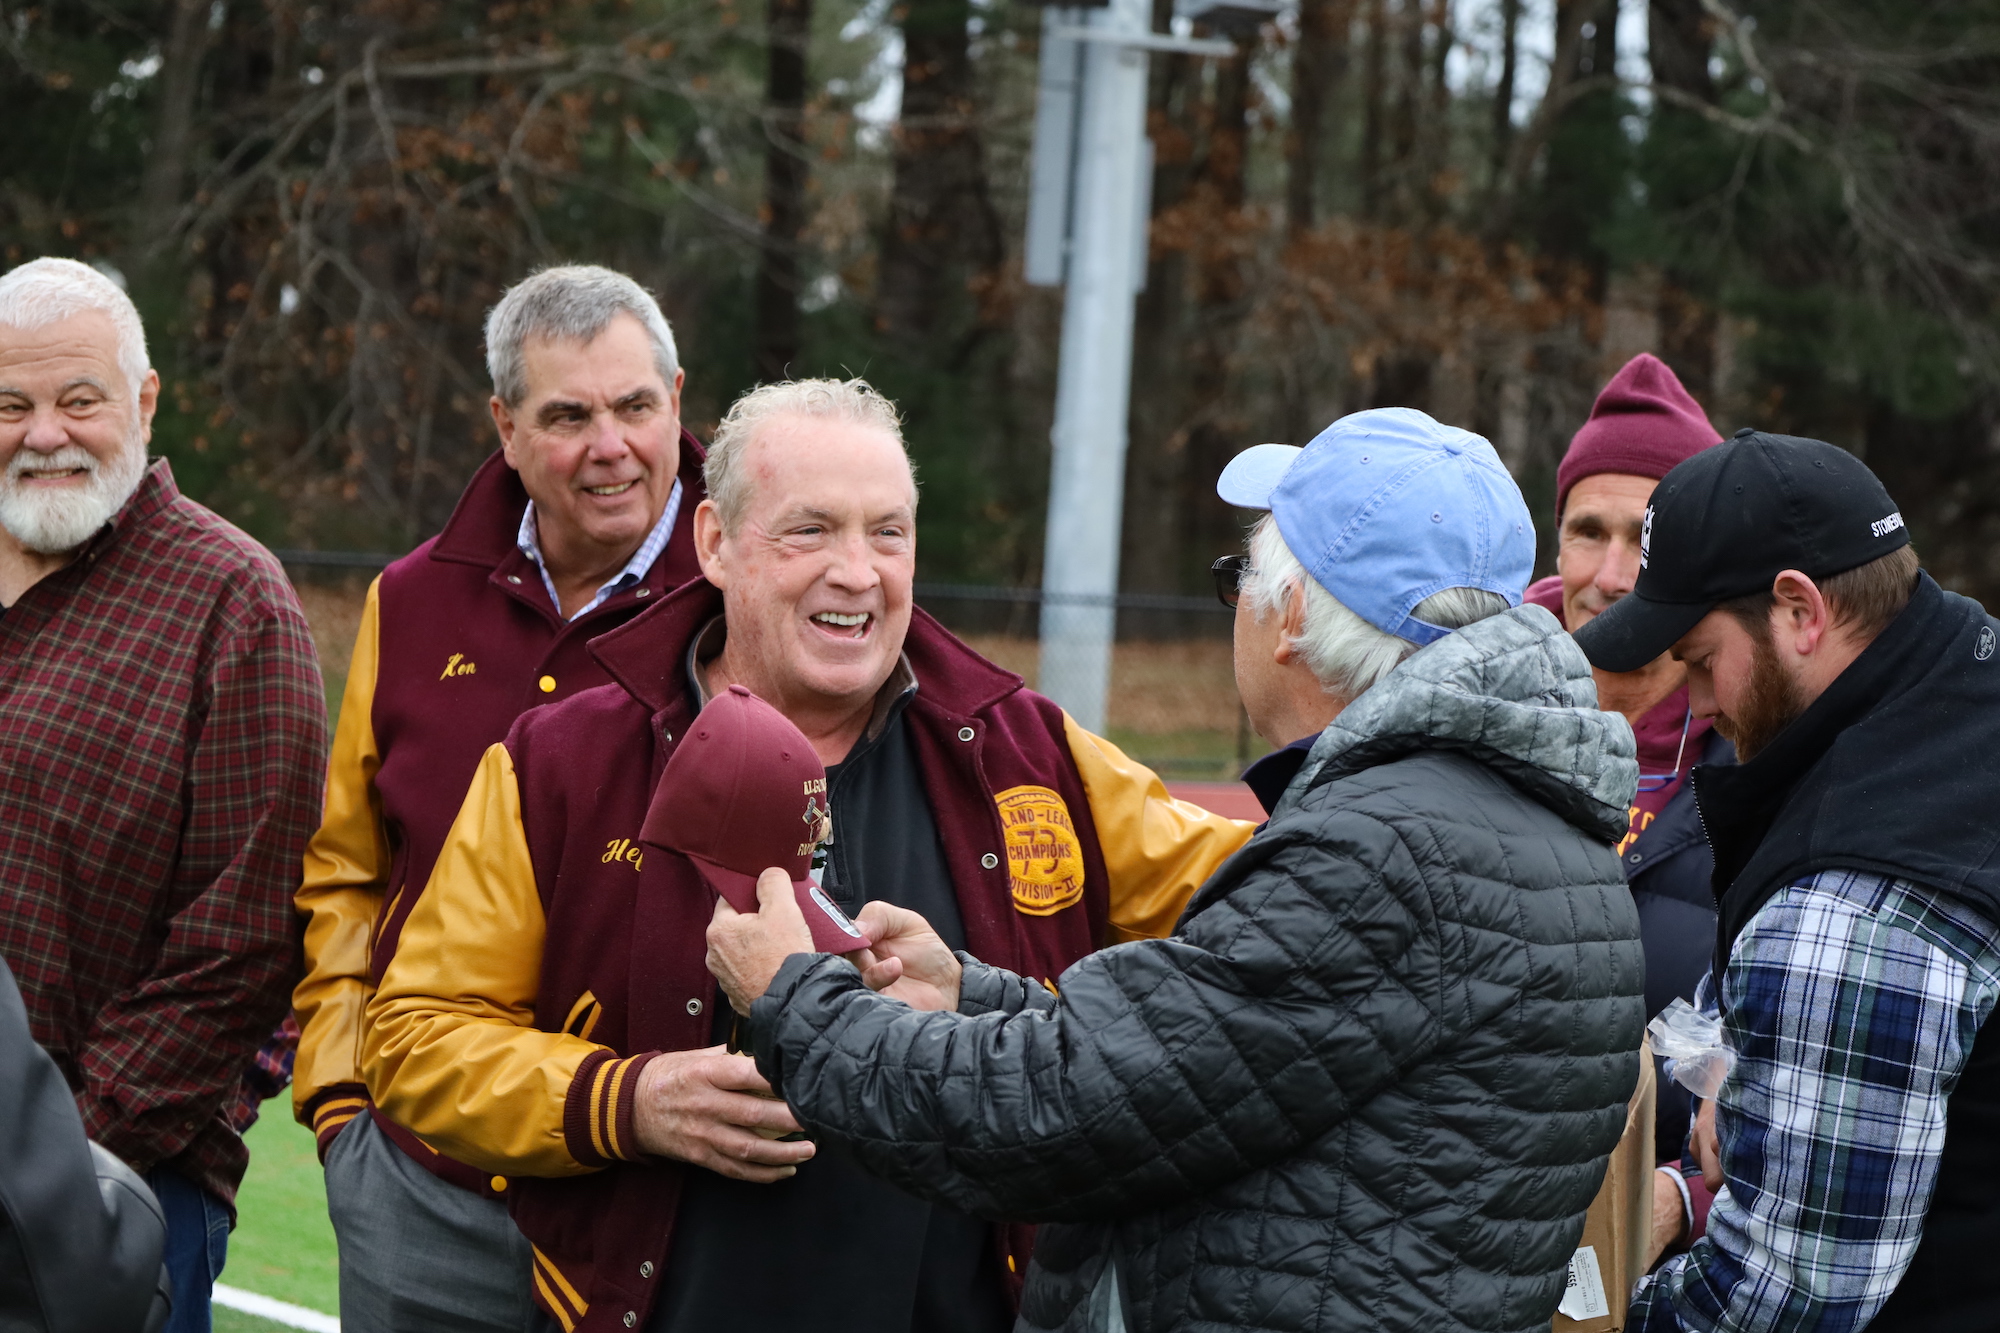 Championship-winning football team reunites at Algonquin after 50 years